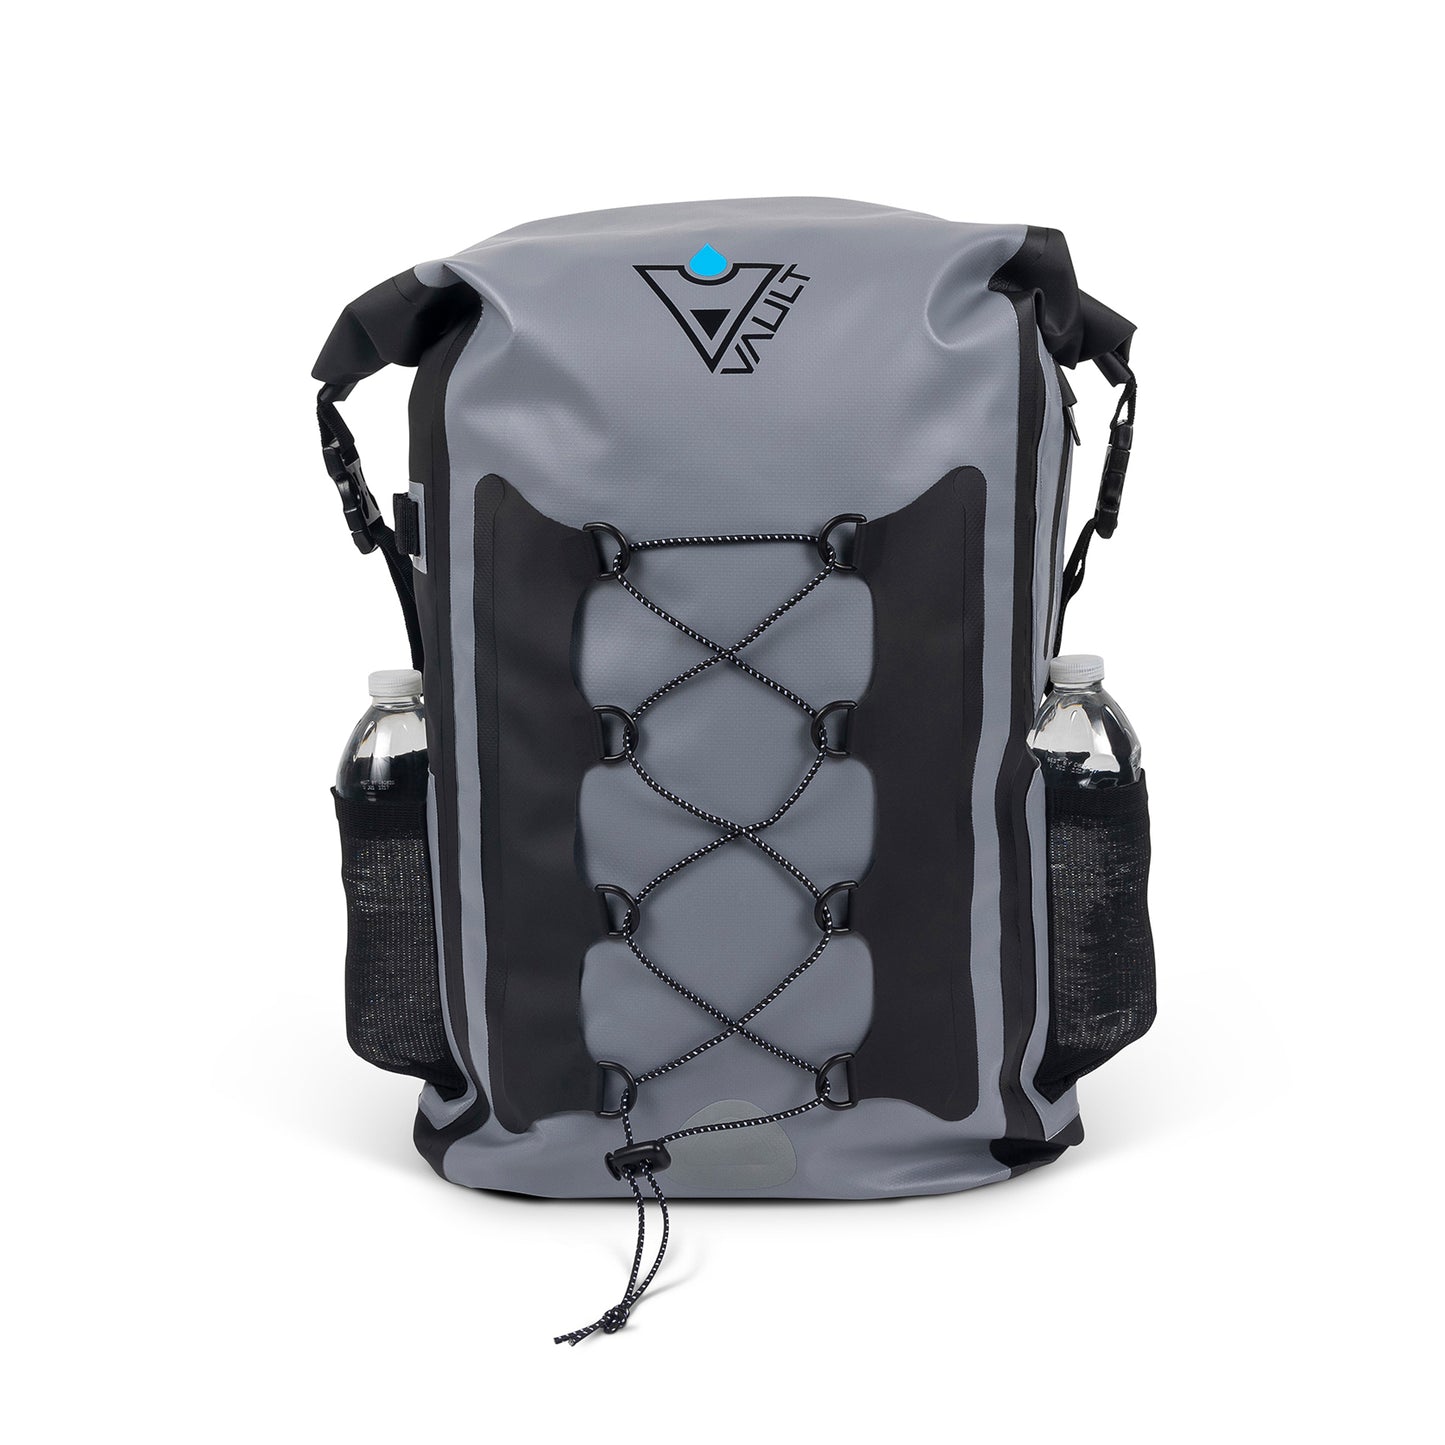 Stretchable mesh drink holders and bungee cord restraint. Prepared for hiking biking or a day on the water.